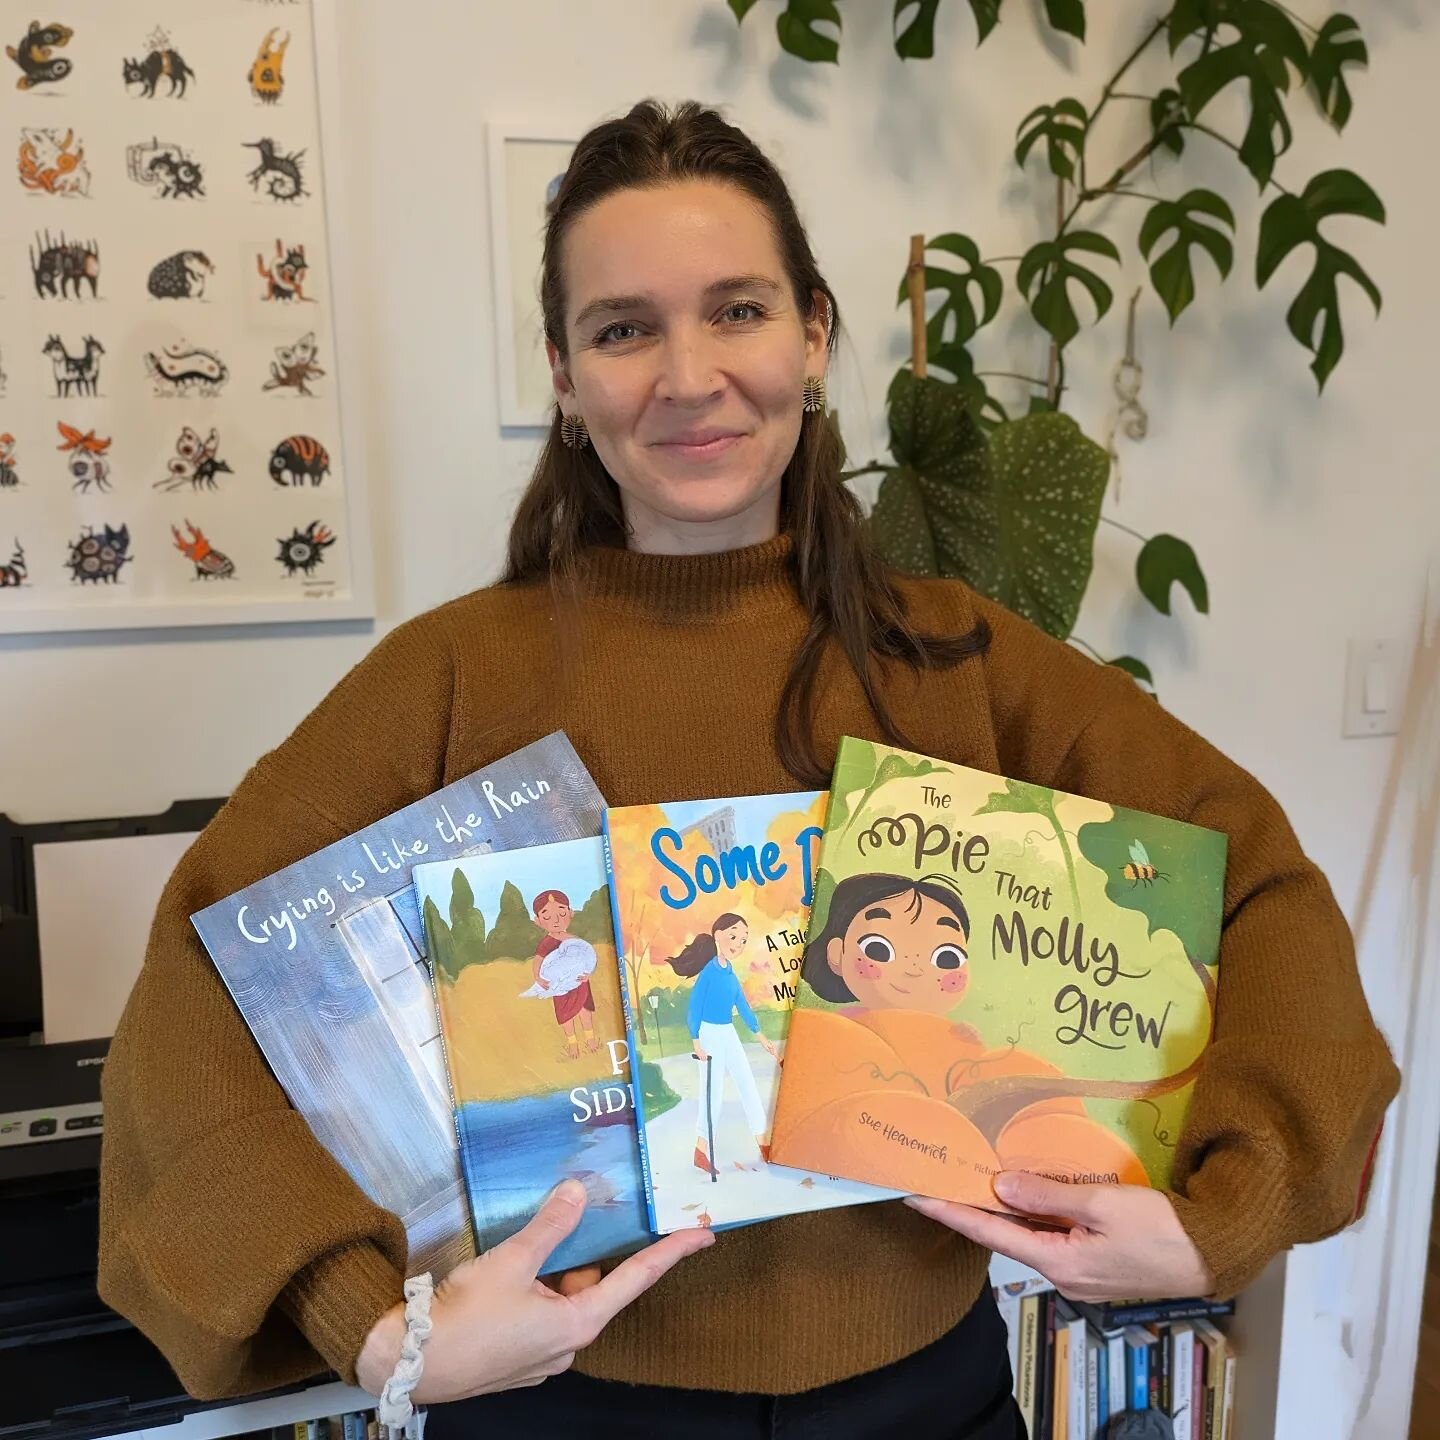 It's World Book Day! Here I am with the 4 books I've illustrated so far! A celebration of books and reading is always something I can get behind, AND if you're in the UK, every kiddo can get a book for &pound;1 or &pound;1.50! Head on over to @worldb